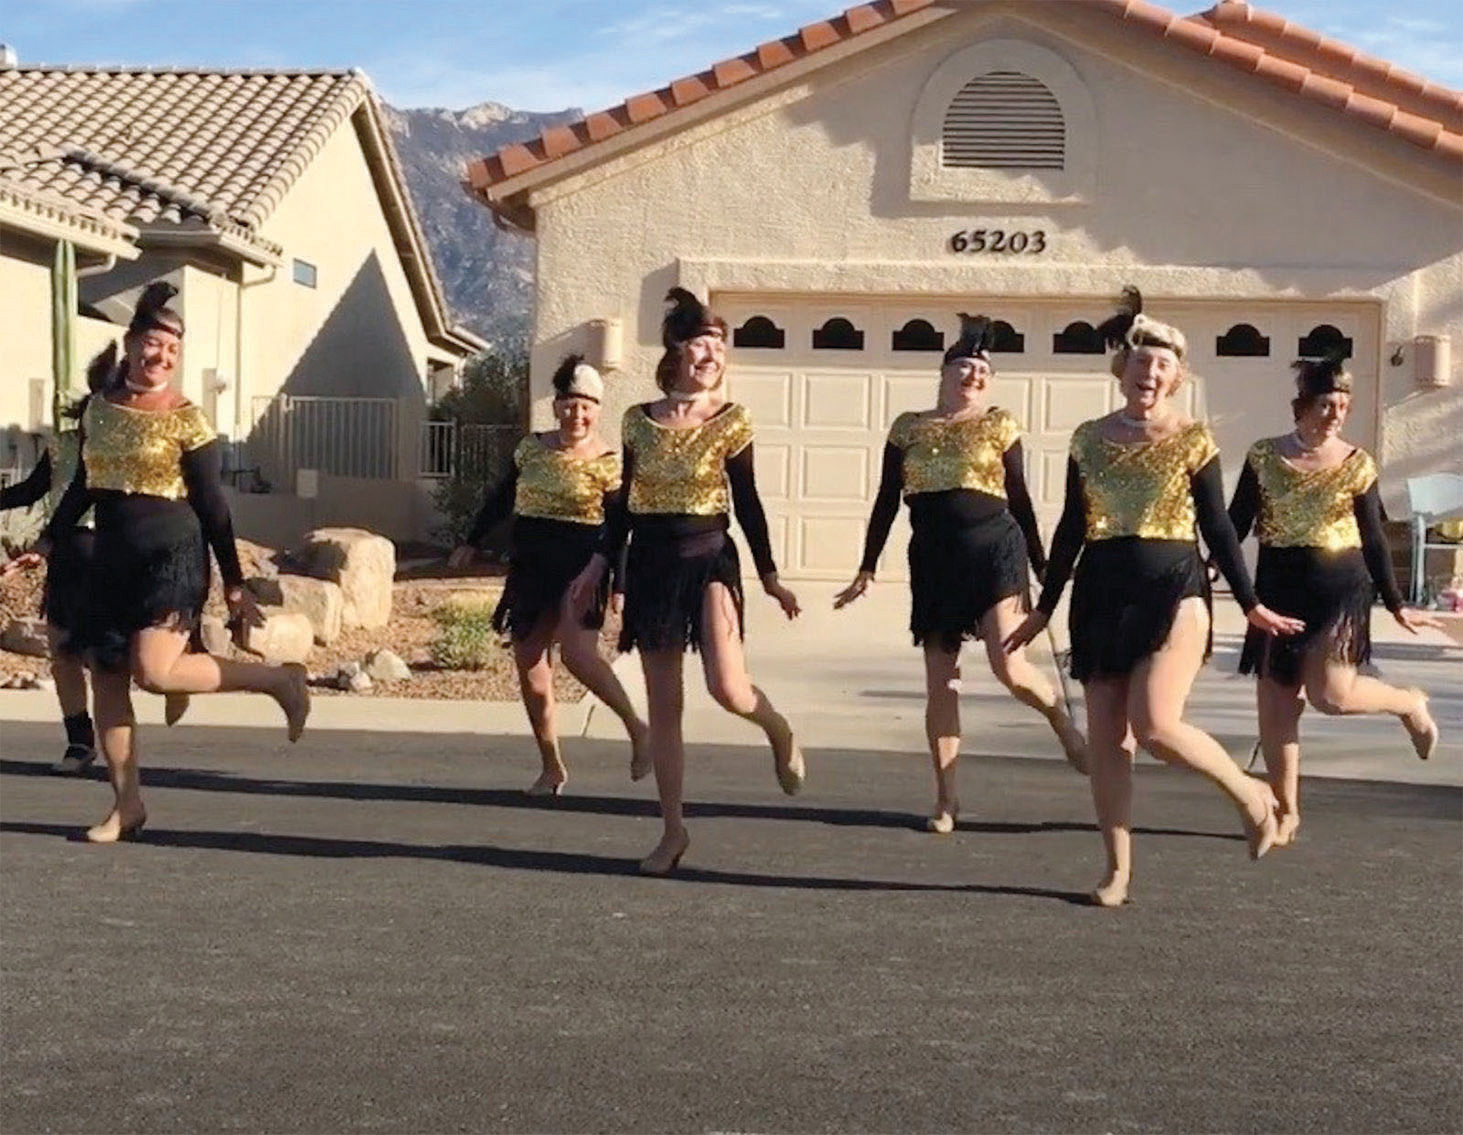 The SilverBelles danced on Diamond Ridge cul-de-sac for a very enthusiastic audience in Unit 10. This was the debut for their new dance to “Hot Honey Rag.”